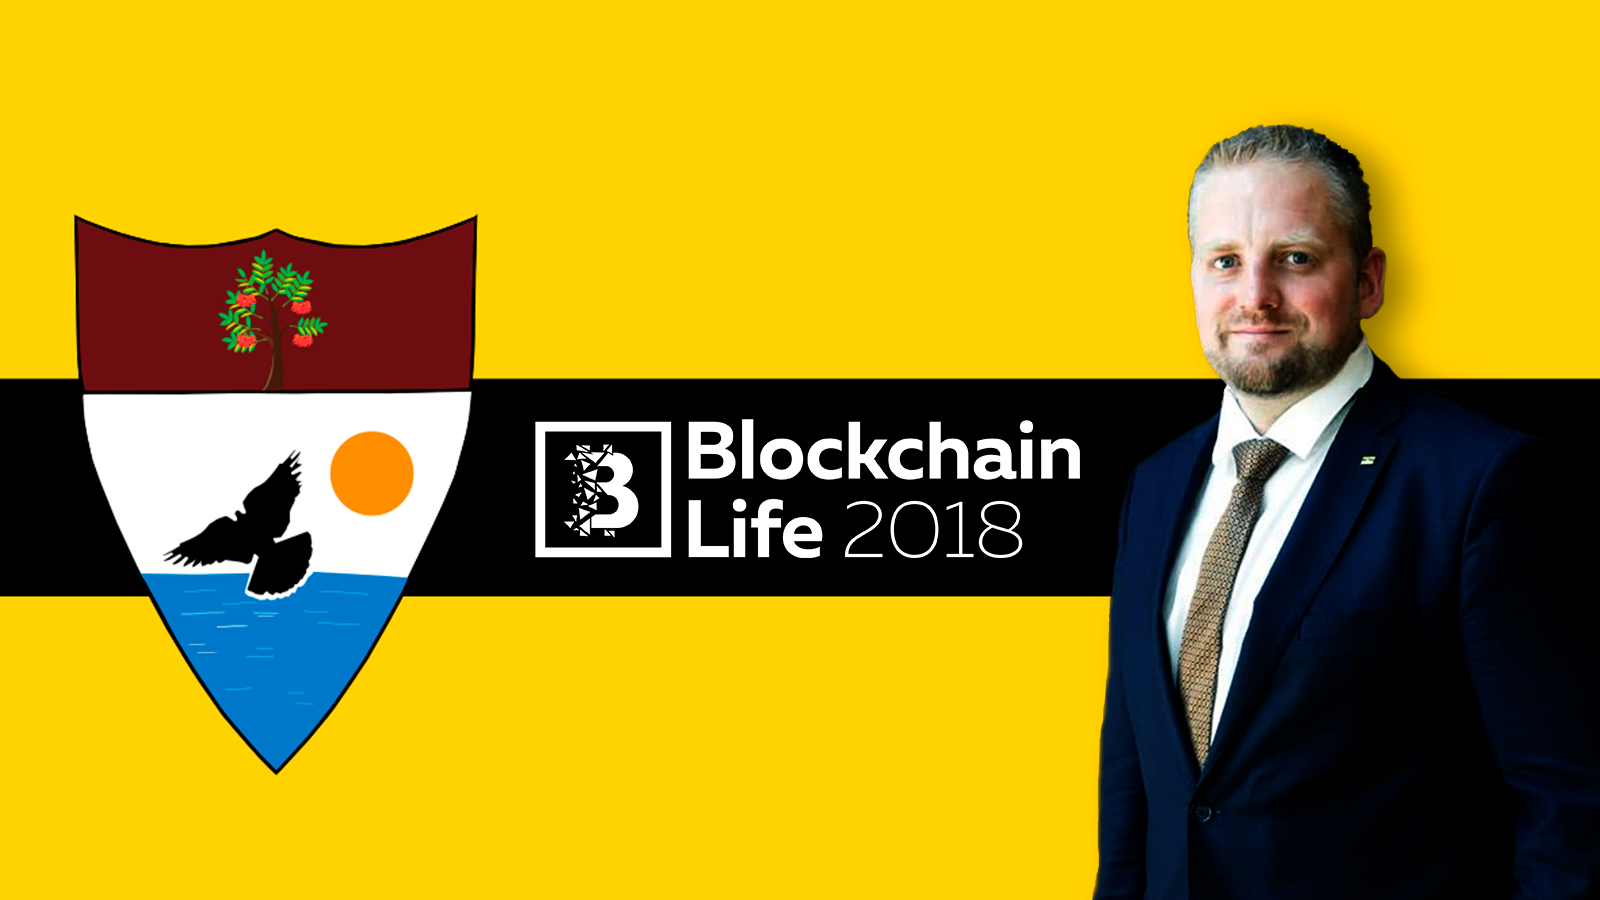 The President confirmed his participation in Blockchain Life 2018